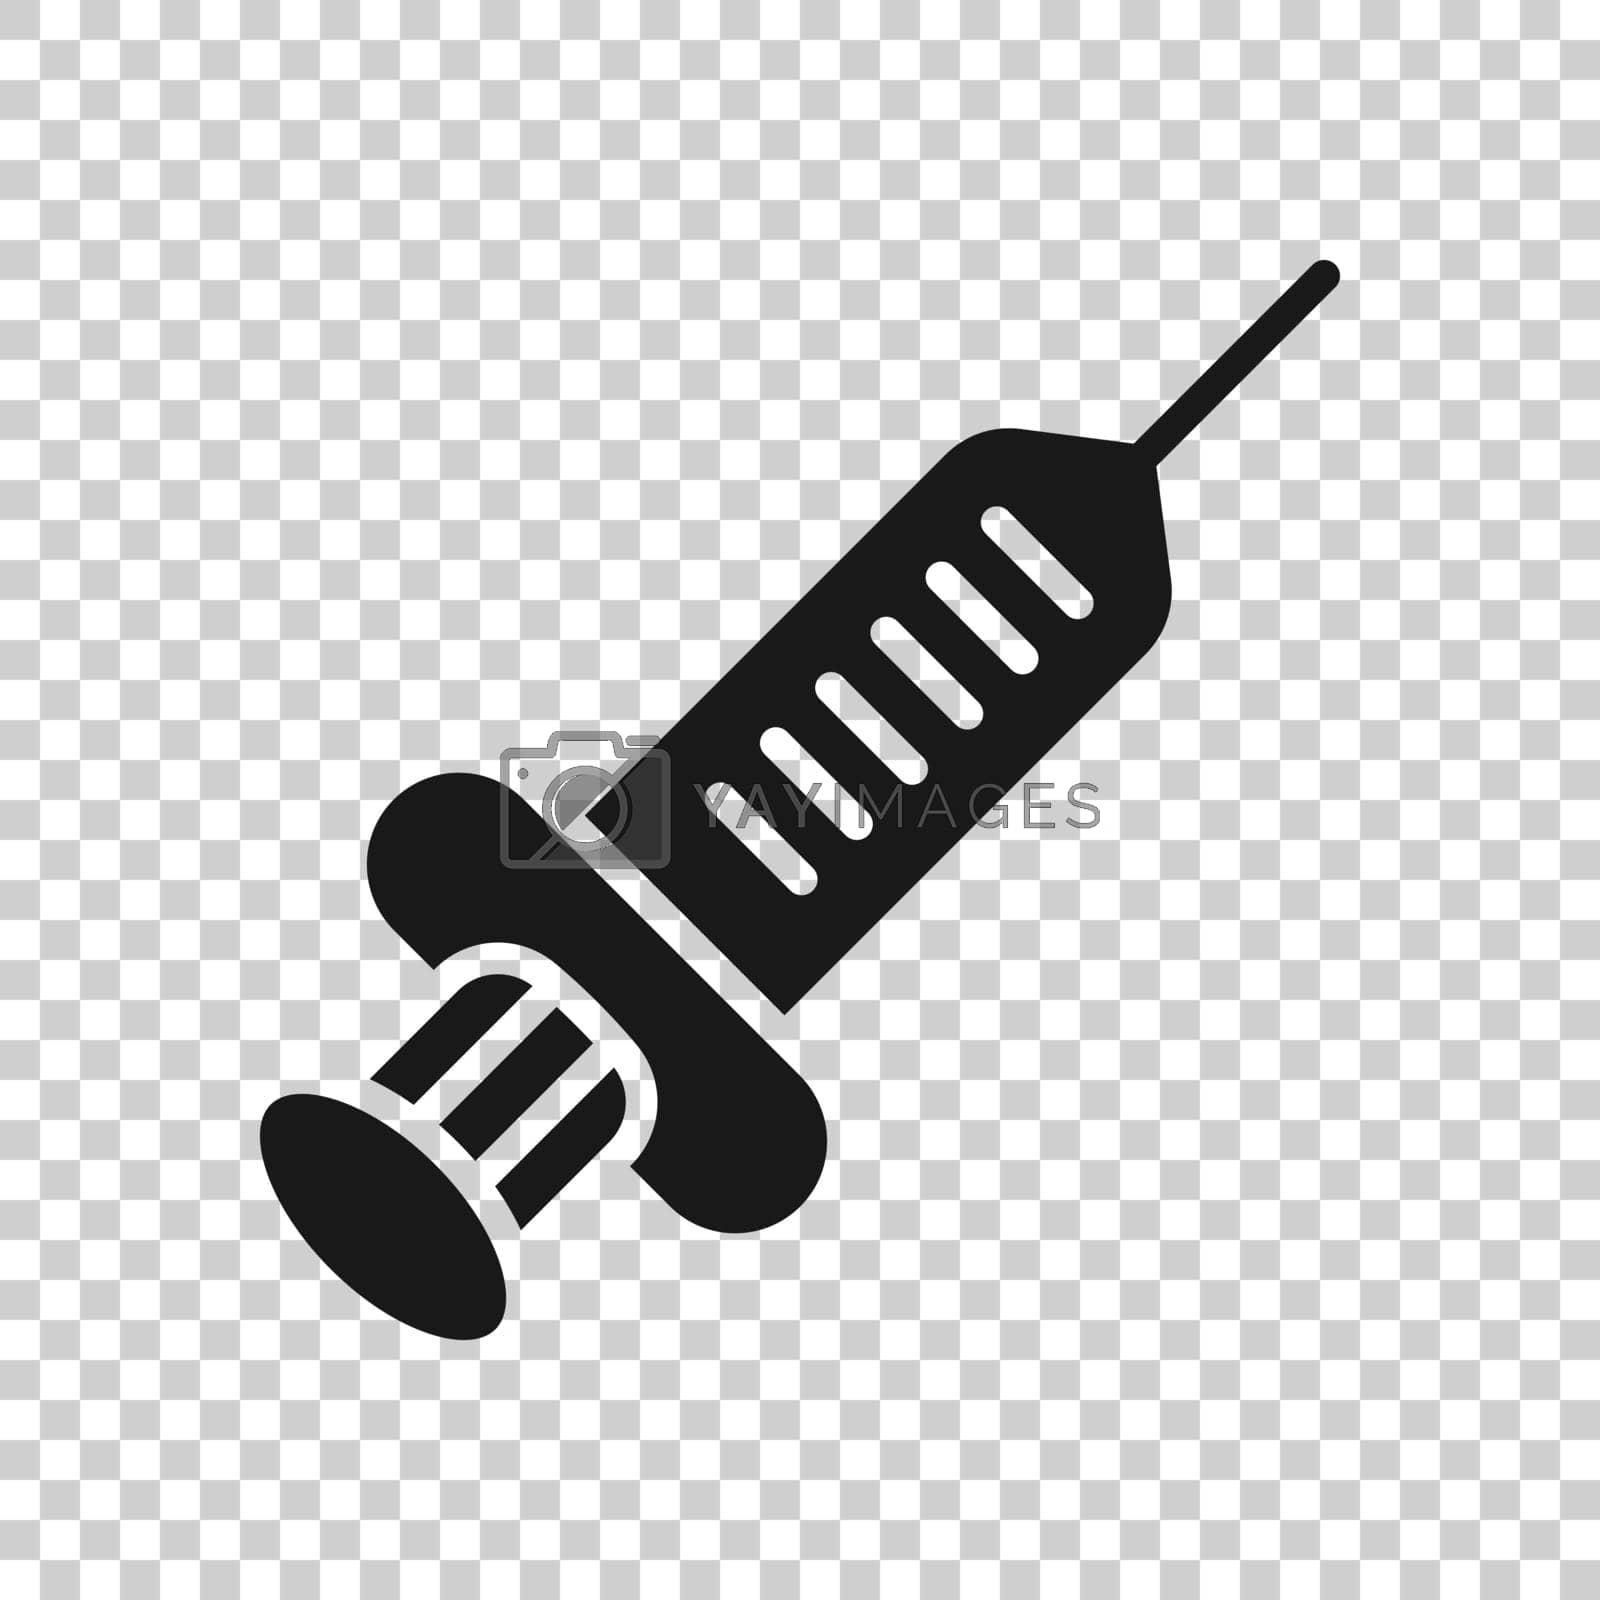 Royalty free image of Syringe icon in flat style. Inject needle vector illustration on white isolated background. Drug dose business concept. by LysenkoA